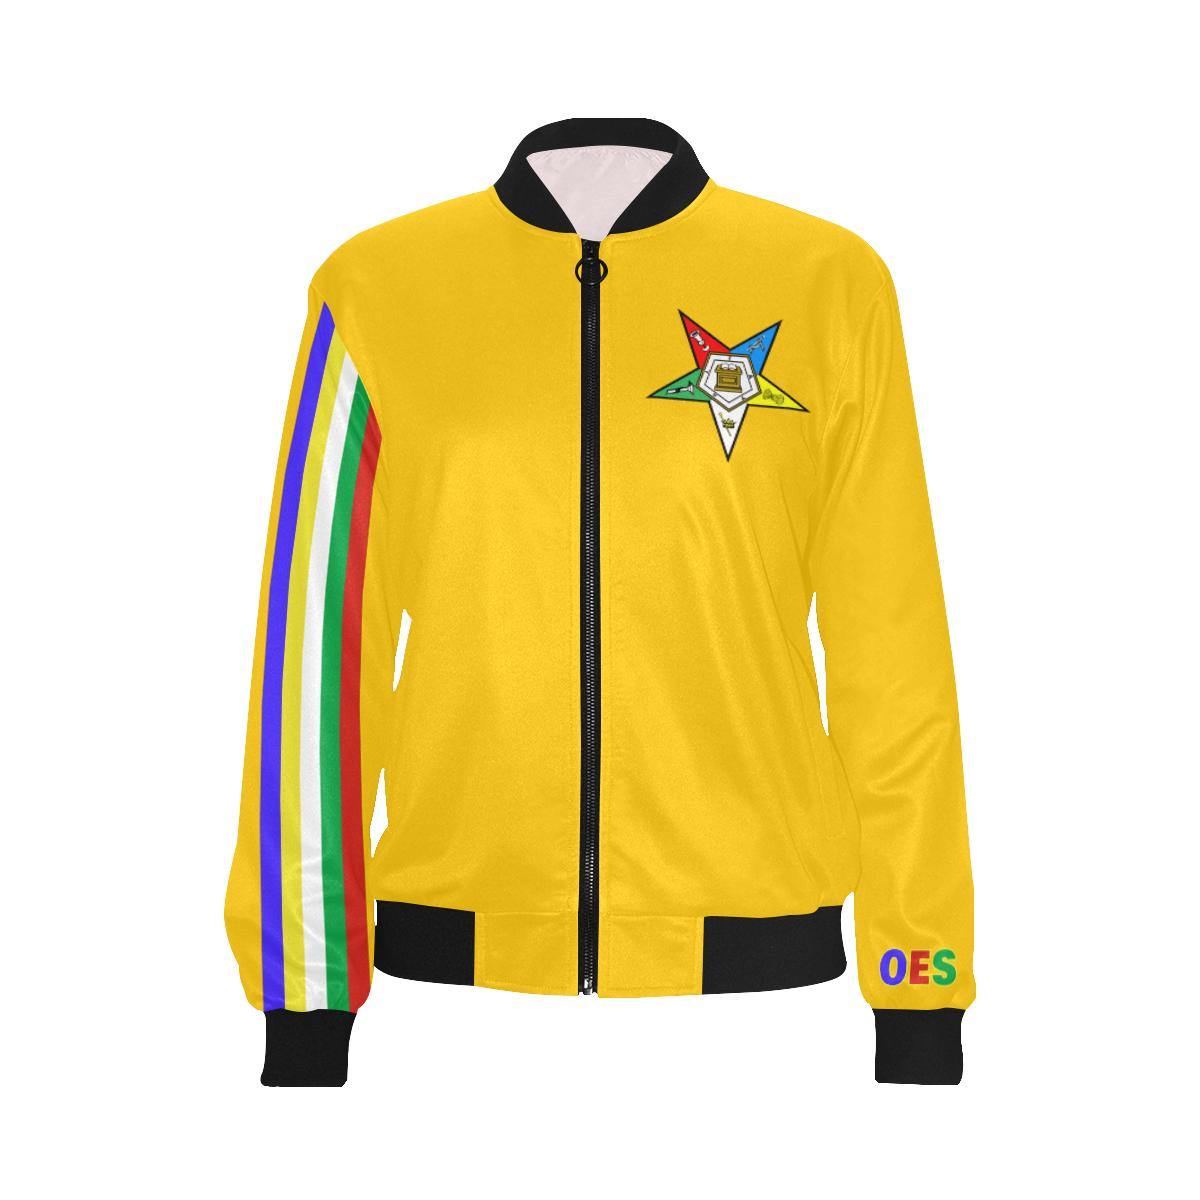 Eastern Star | OES LOVE YELLOW Bomber Jacket – Strong Girl Tees